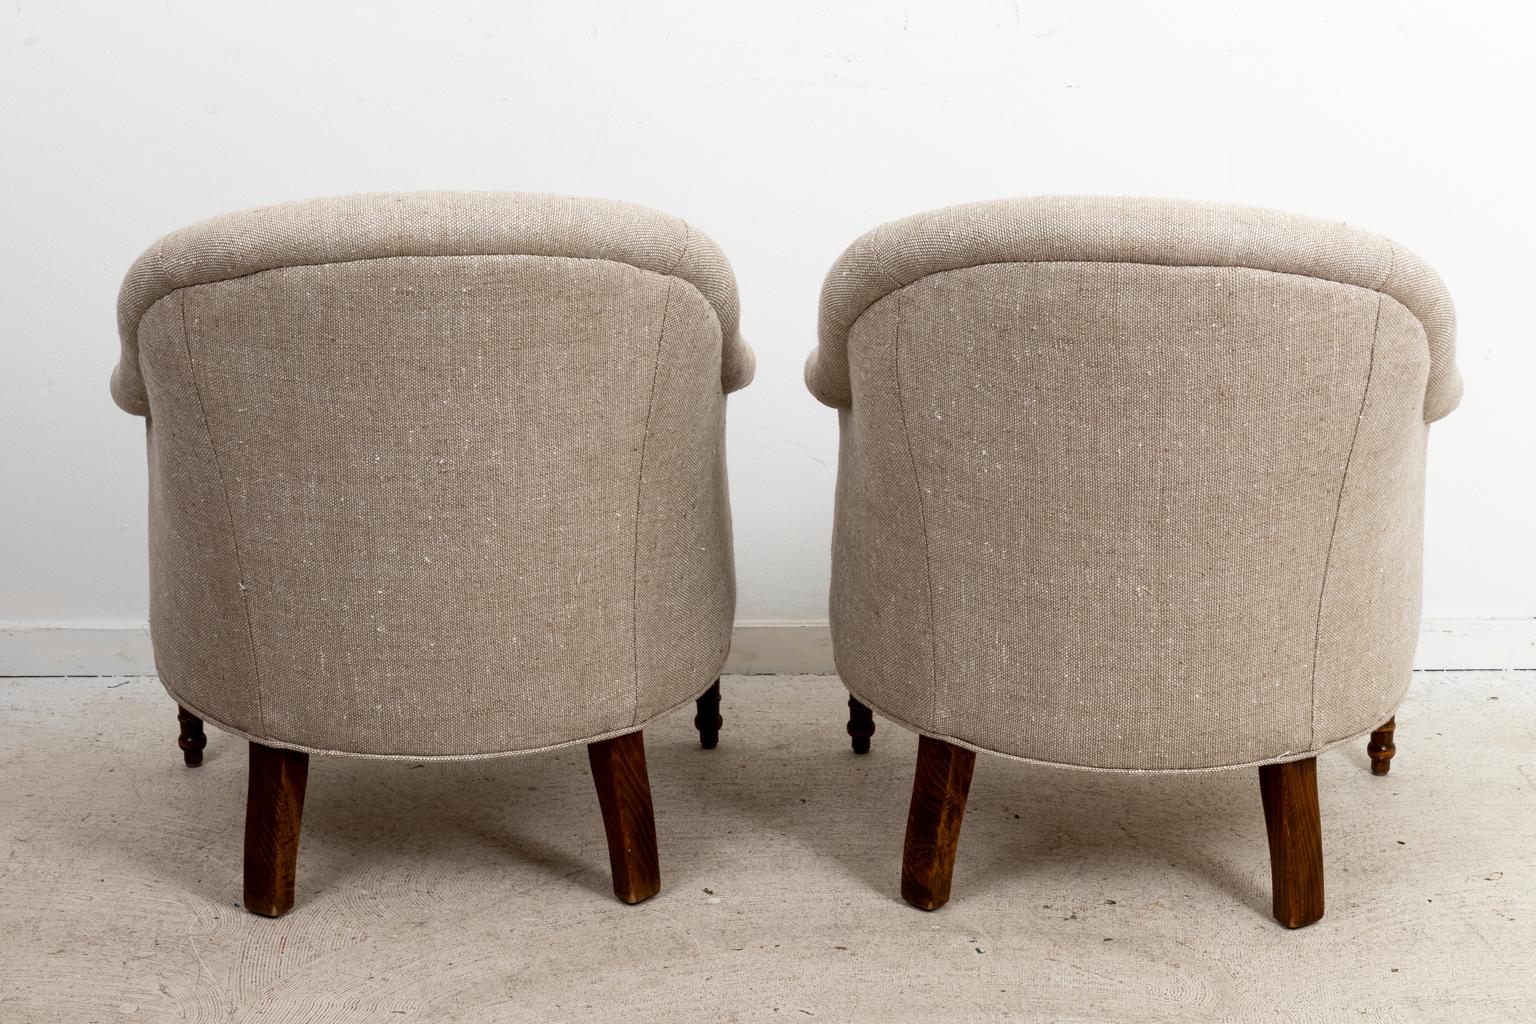 Pair of English club chairs, freshly upholstered in Linen. Made in England. Please note of wear consistent with age.